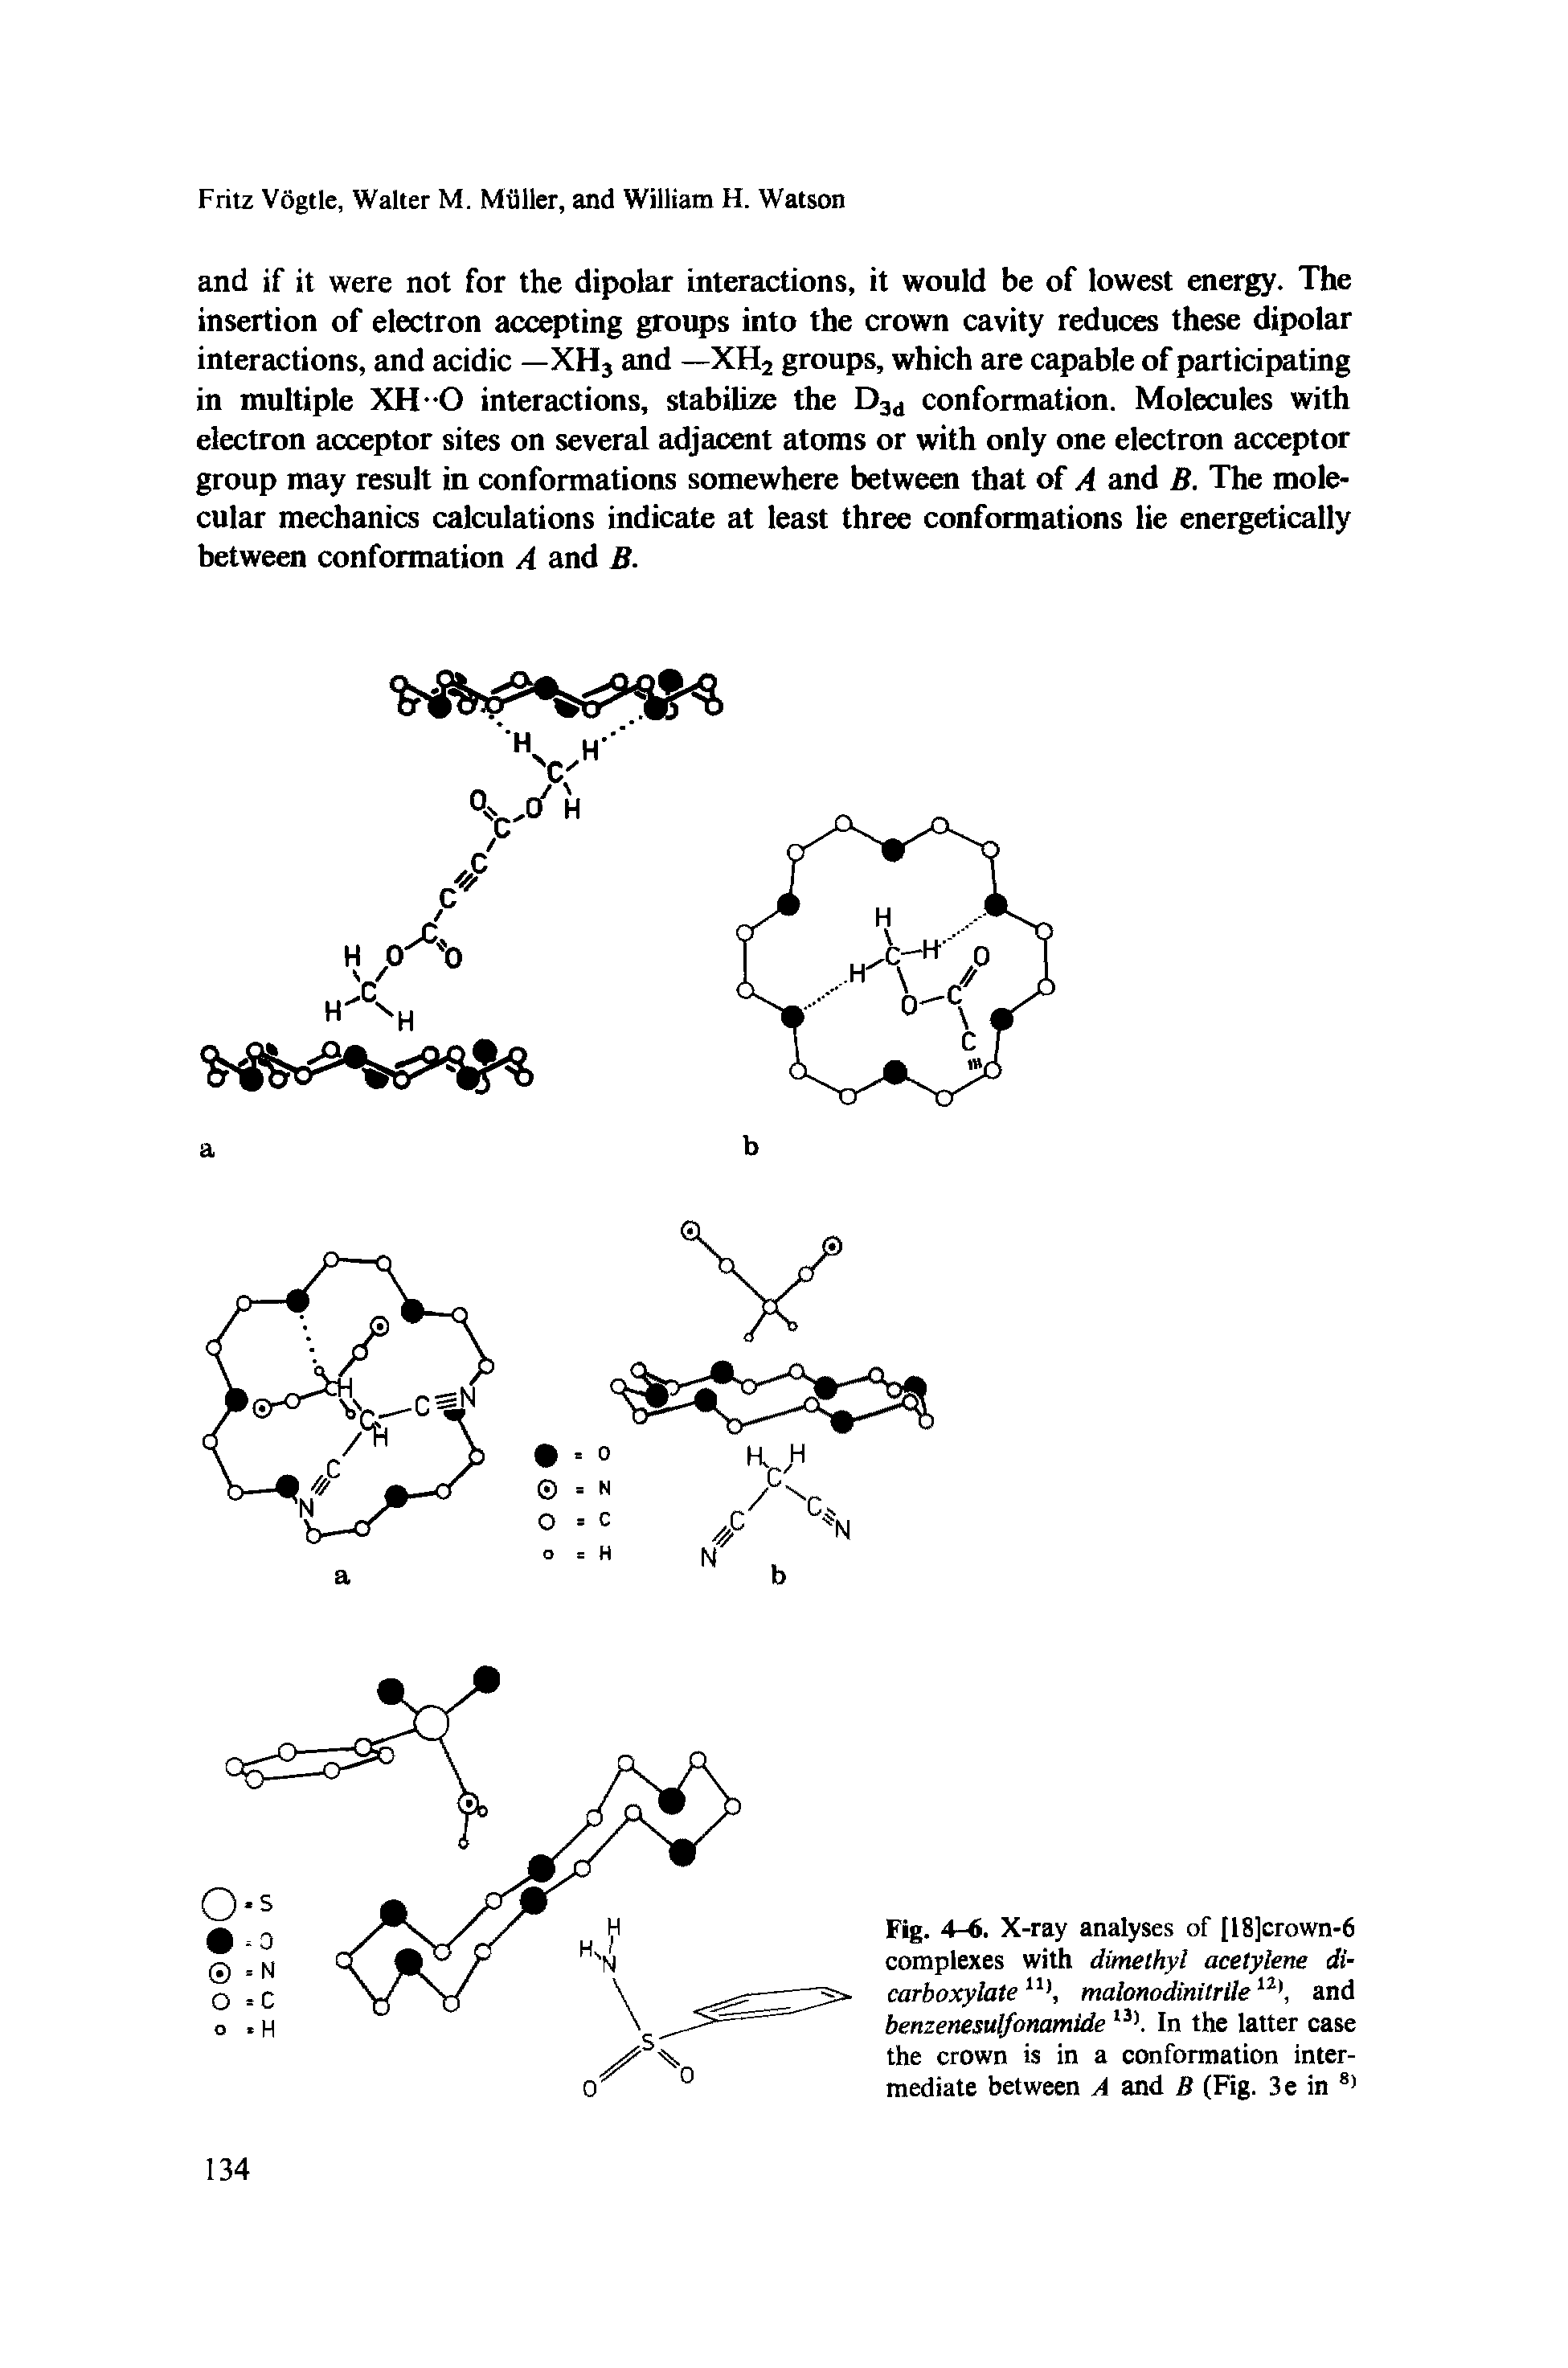 Fig. 4-6. X-ray analyses of [18]crown-6 complexes with dimethyl acetylene di-carboxylateU), malonodinitrilen), and benzenesulfonamide 13). In the latter case the crown is in a conformation intermediate between A and B (Fig. 3e in 8)...